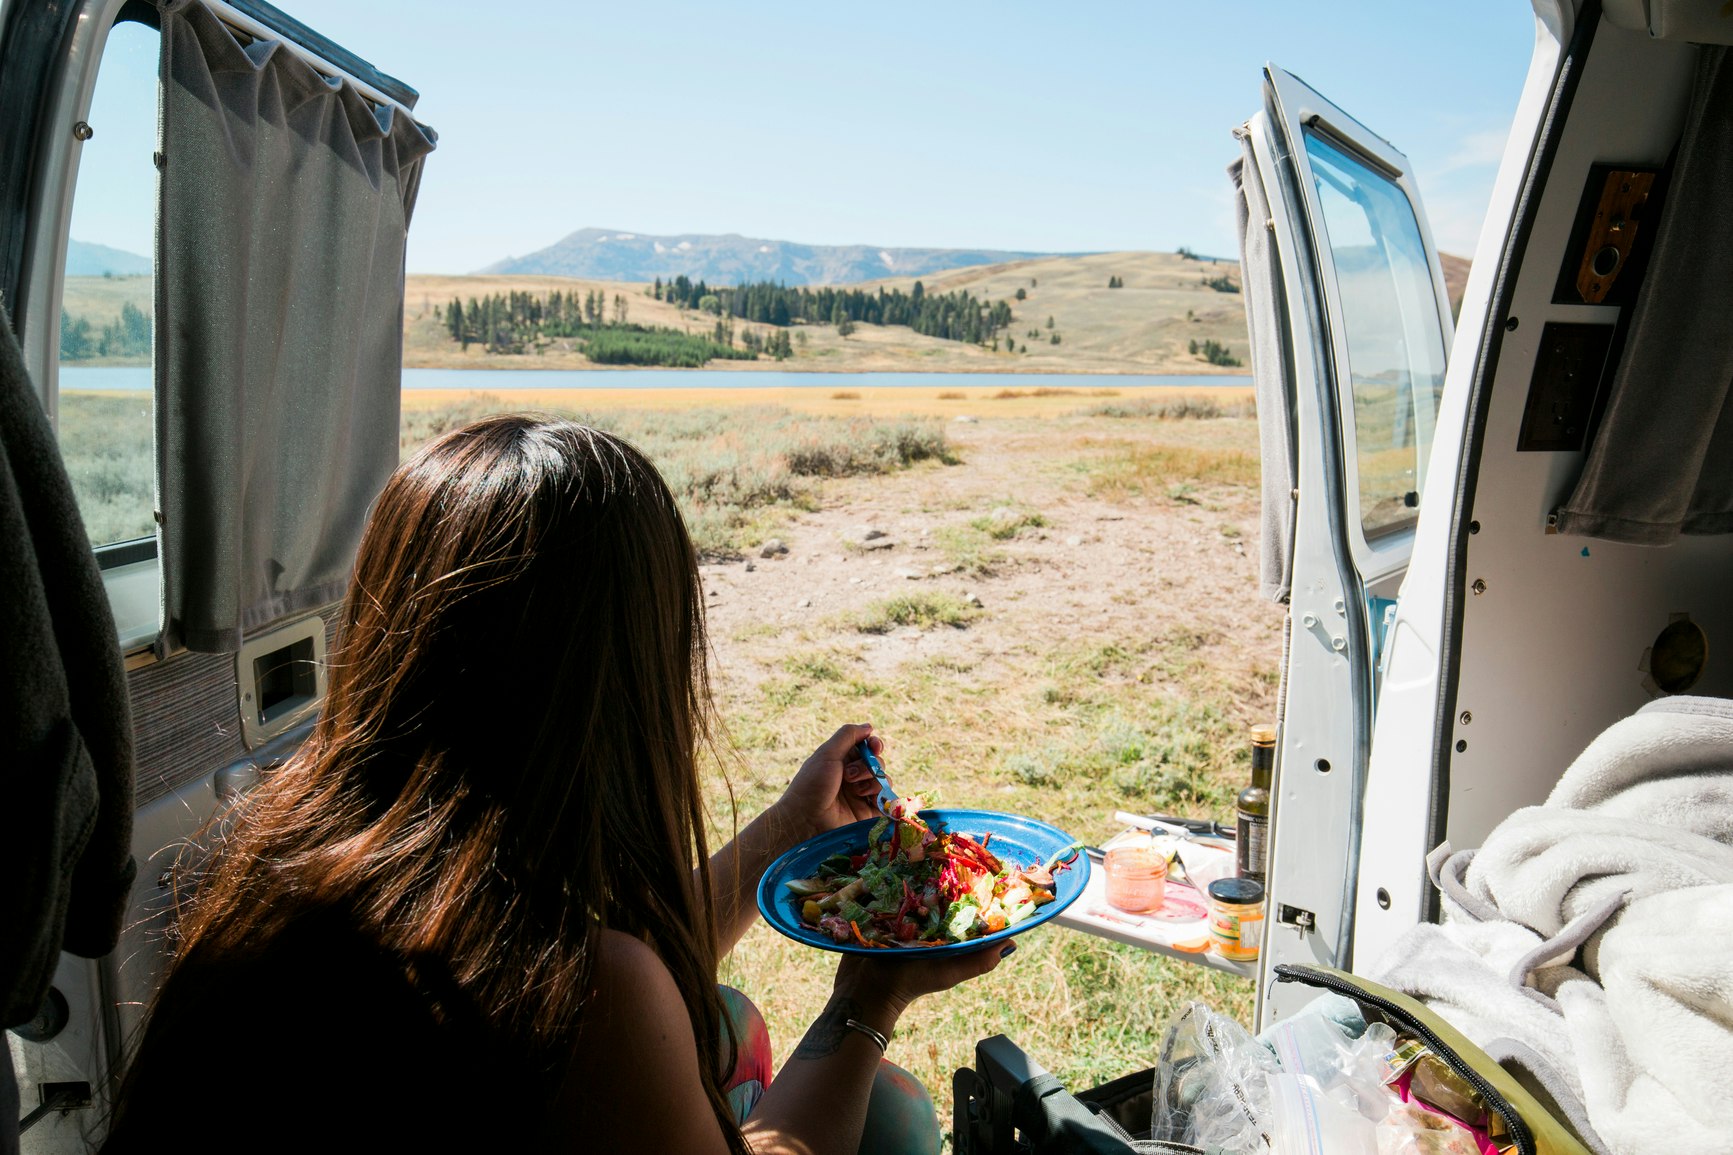 Woman inside a van eating from a plate while looking out to the Yellowstone landscape